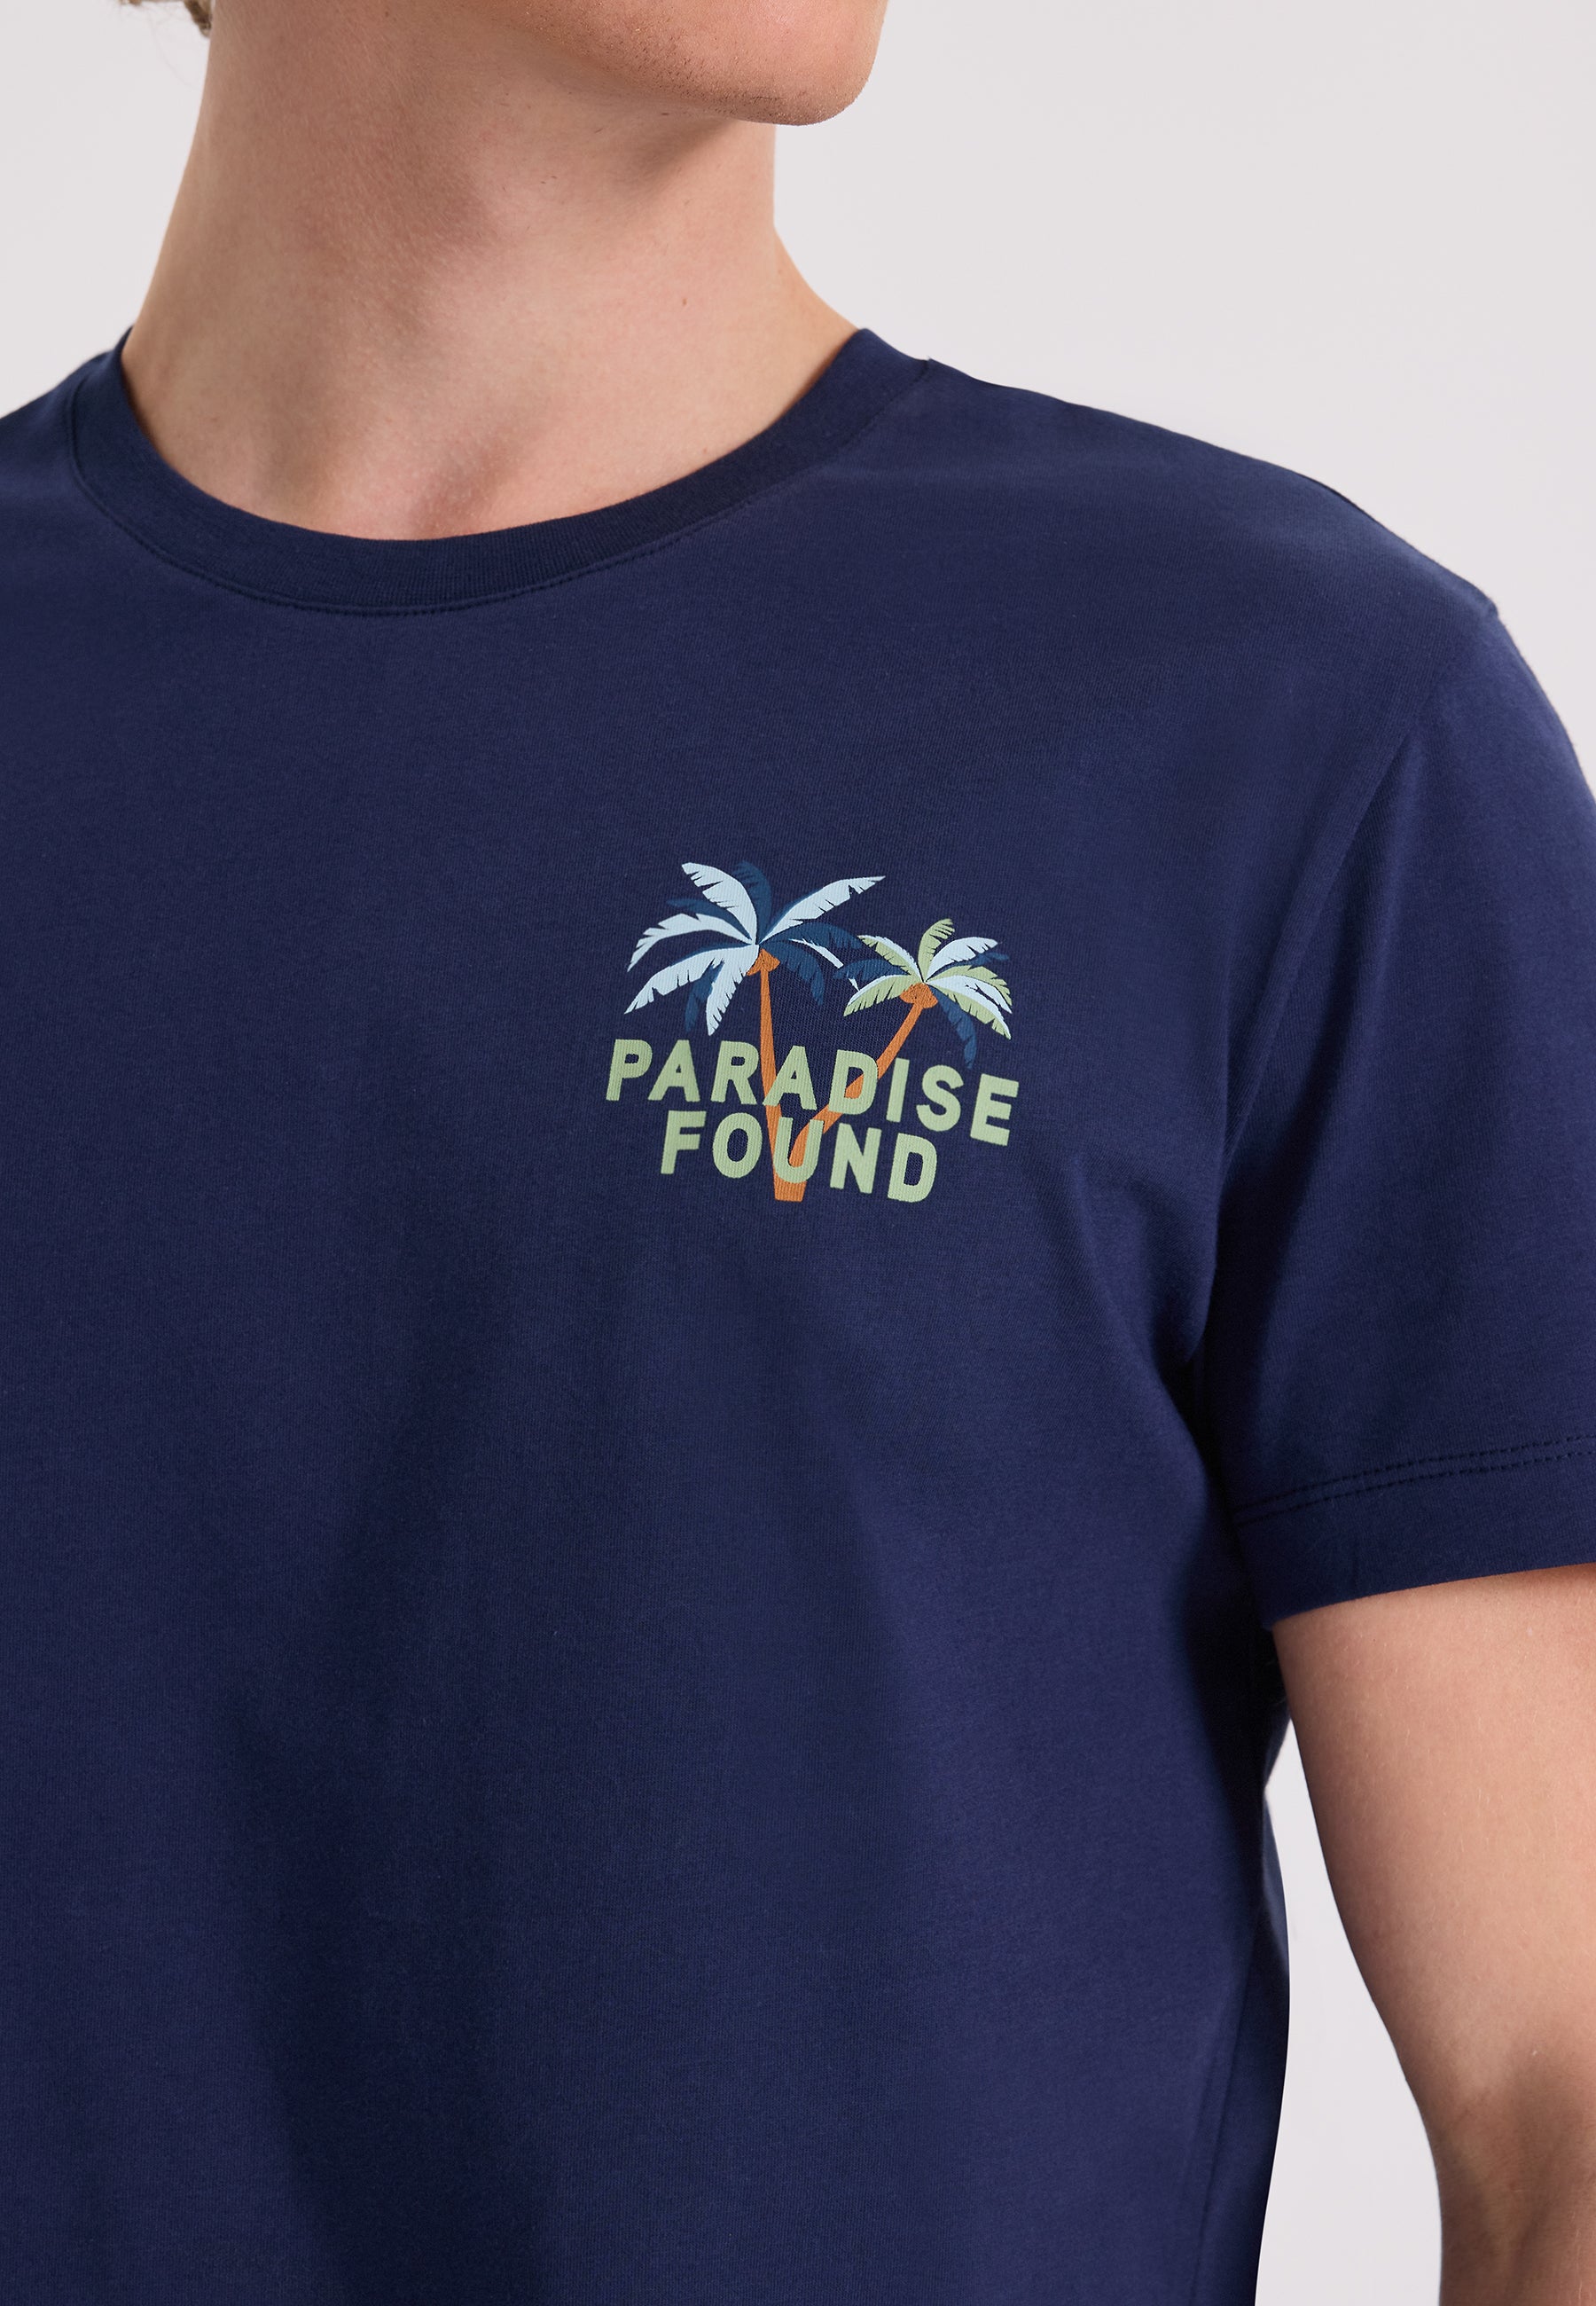 WMBACK PARADISE TEE in Naval Academy